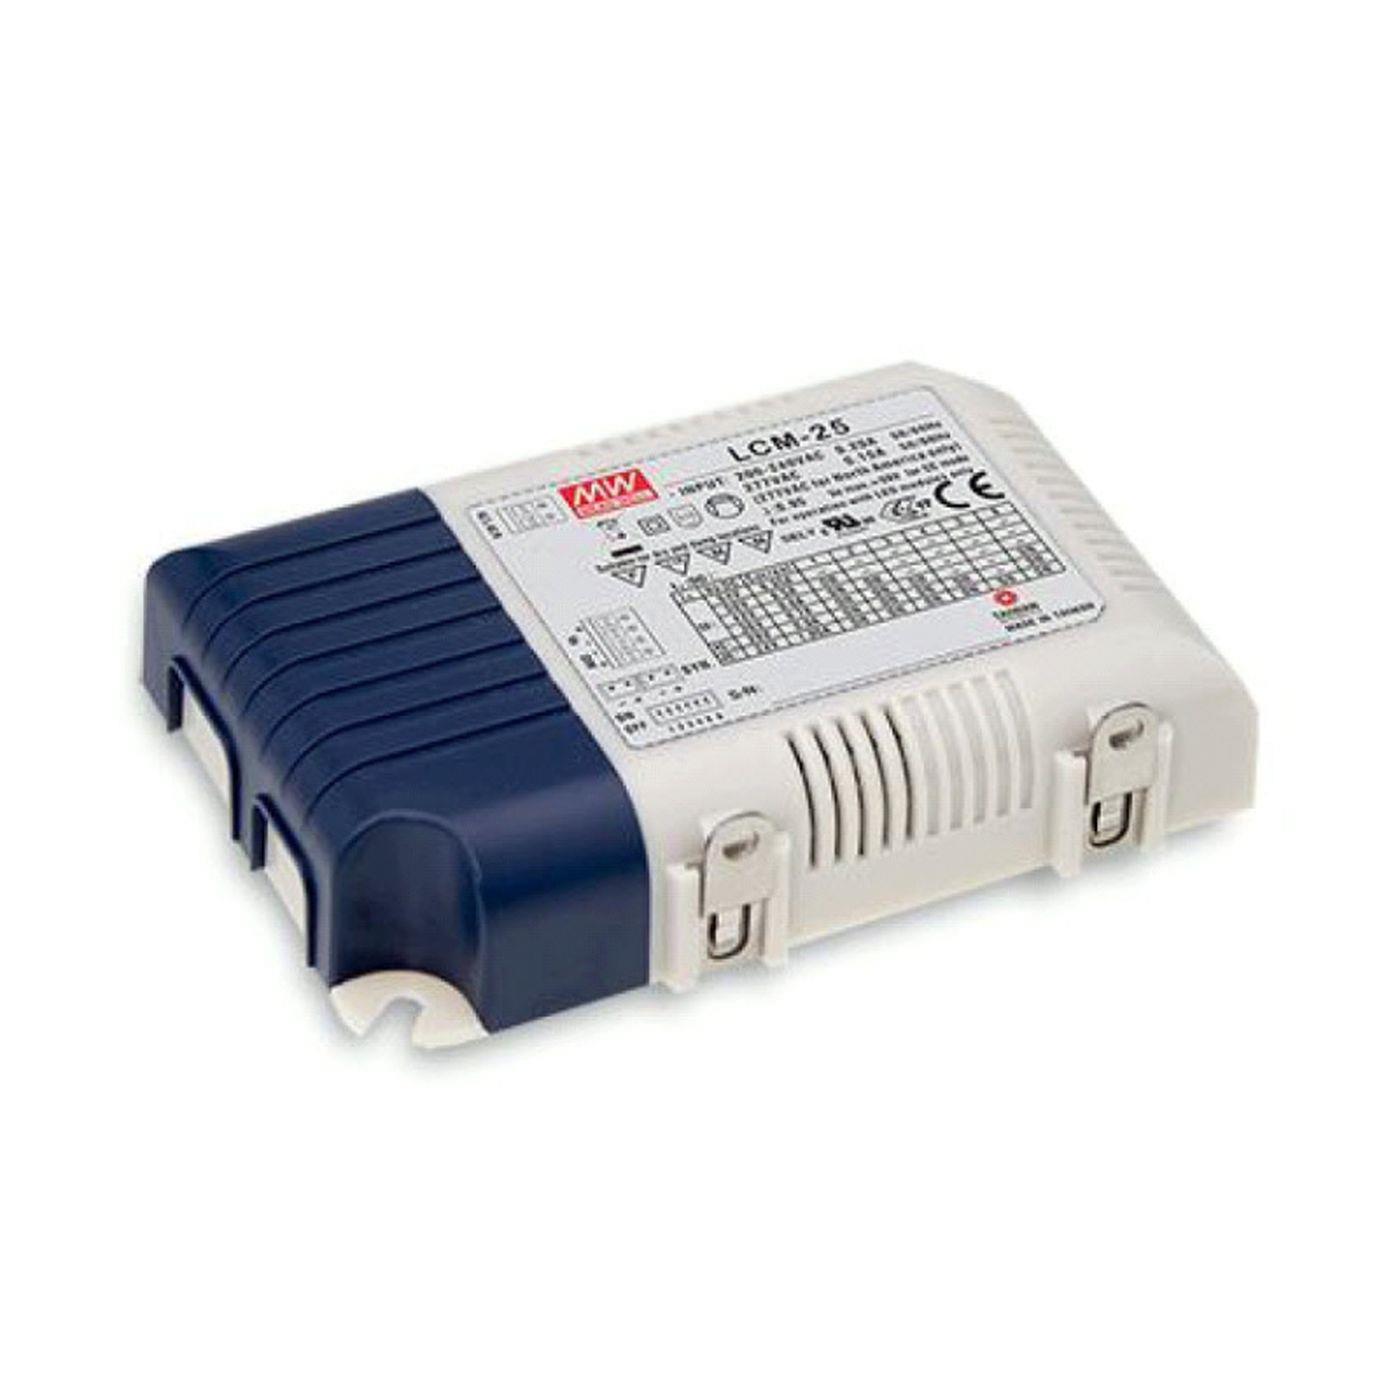 LCM-25 25W 0-10V Dimmable Constant current LED power supply Driver Transformer 350 500 600 700 900 1050 1400mA